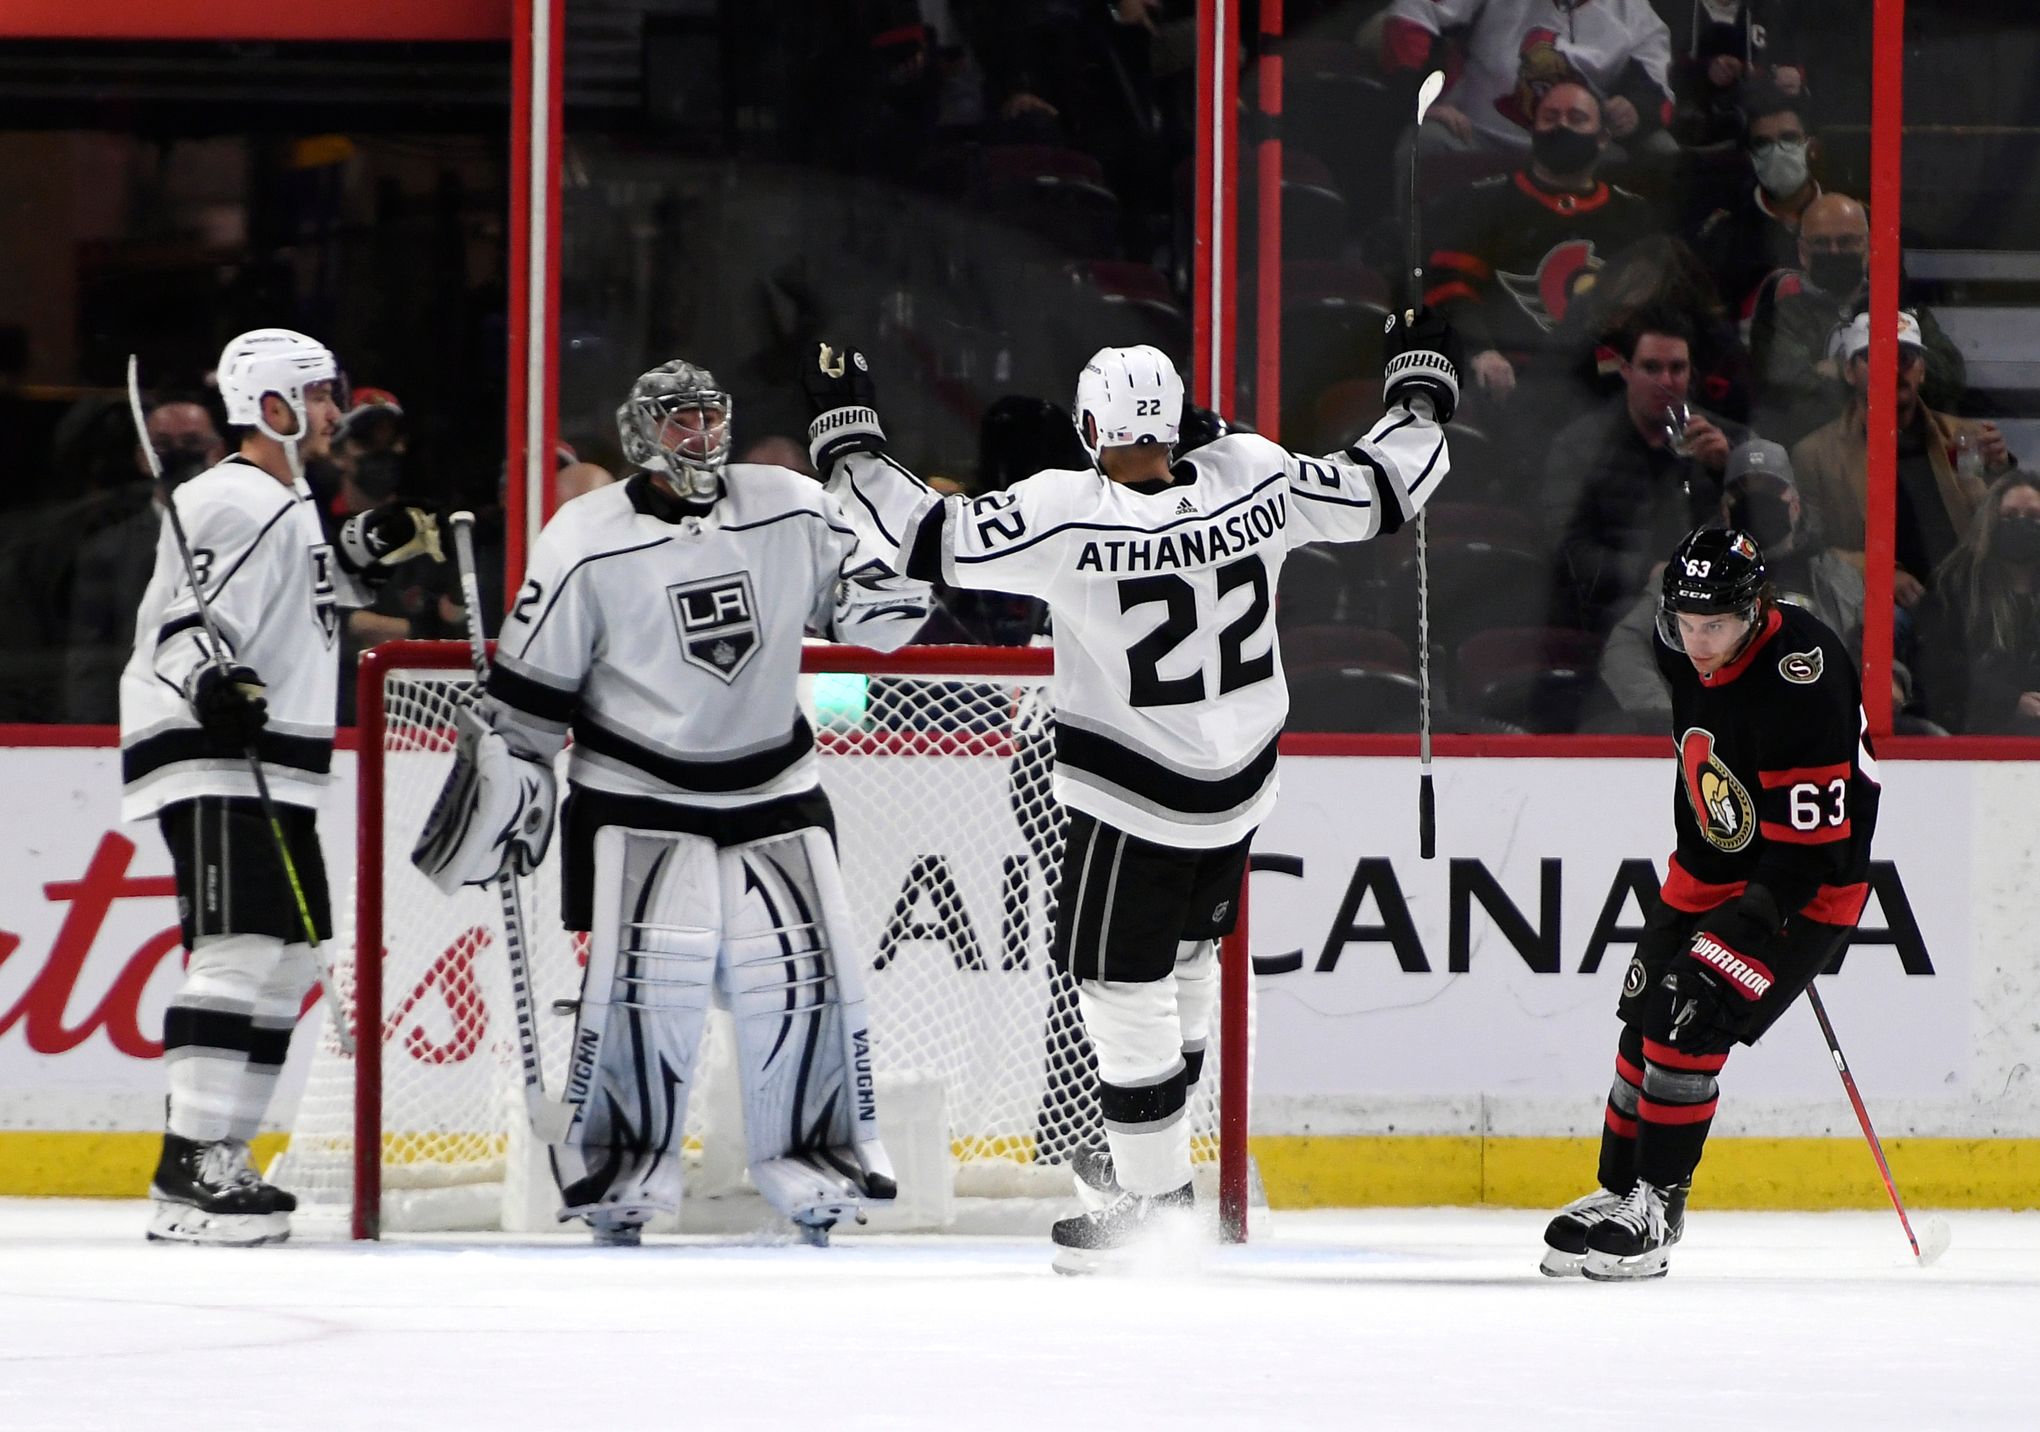 Quick stops 32 shots, Kings beat Sens 2-0 for 7th win a row - Seattle Sports